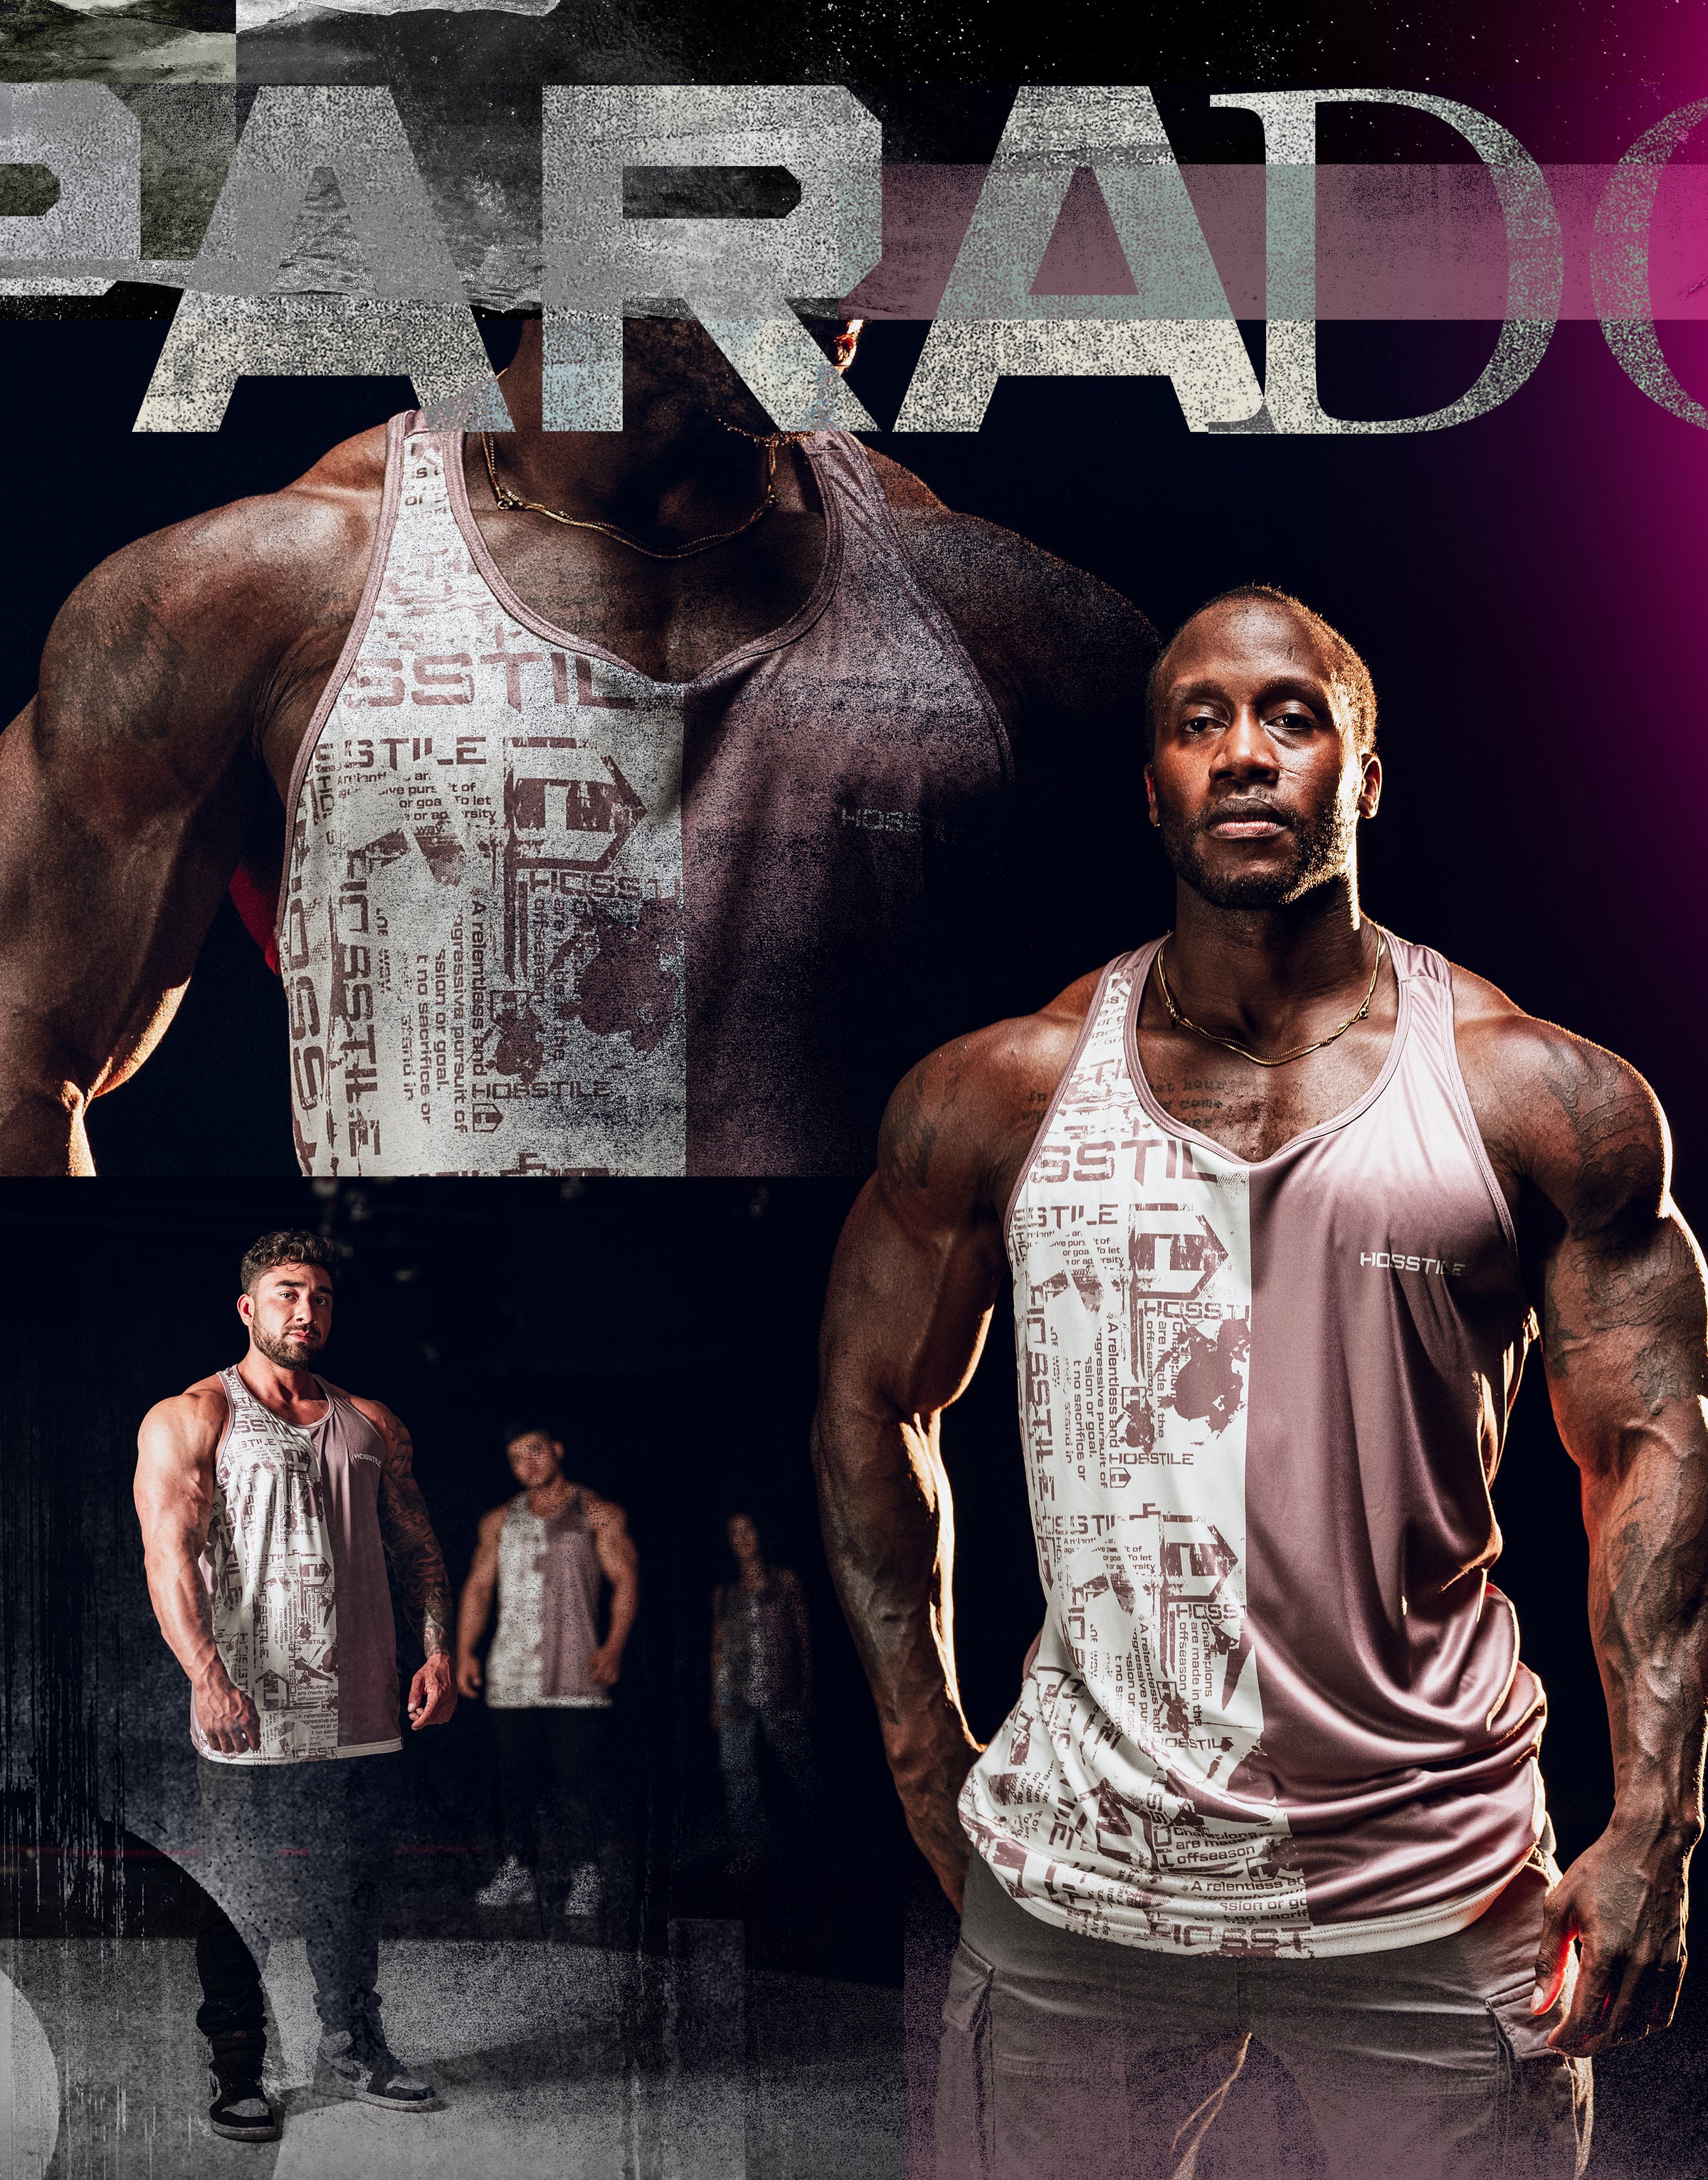 Paradox Collection Long Body T-shirts Summer 2023